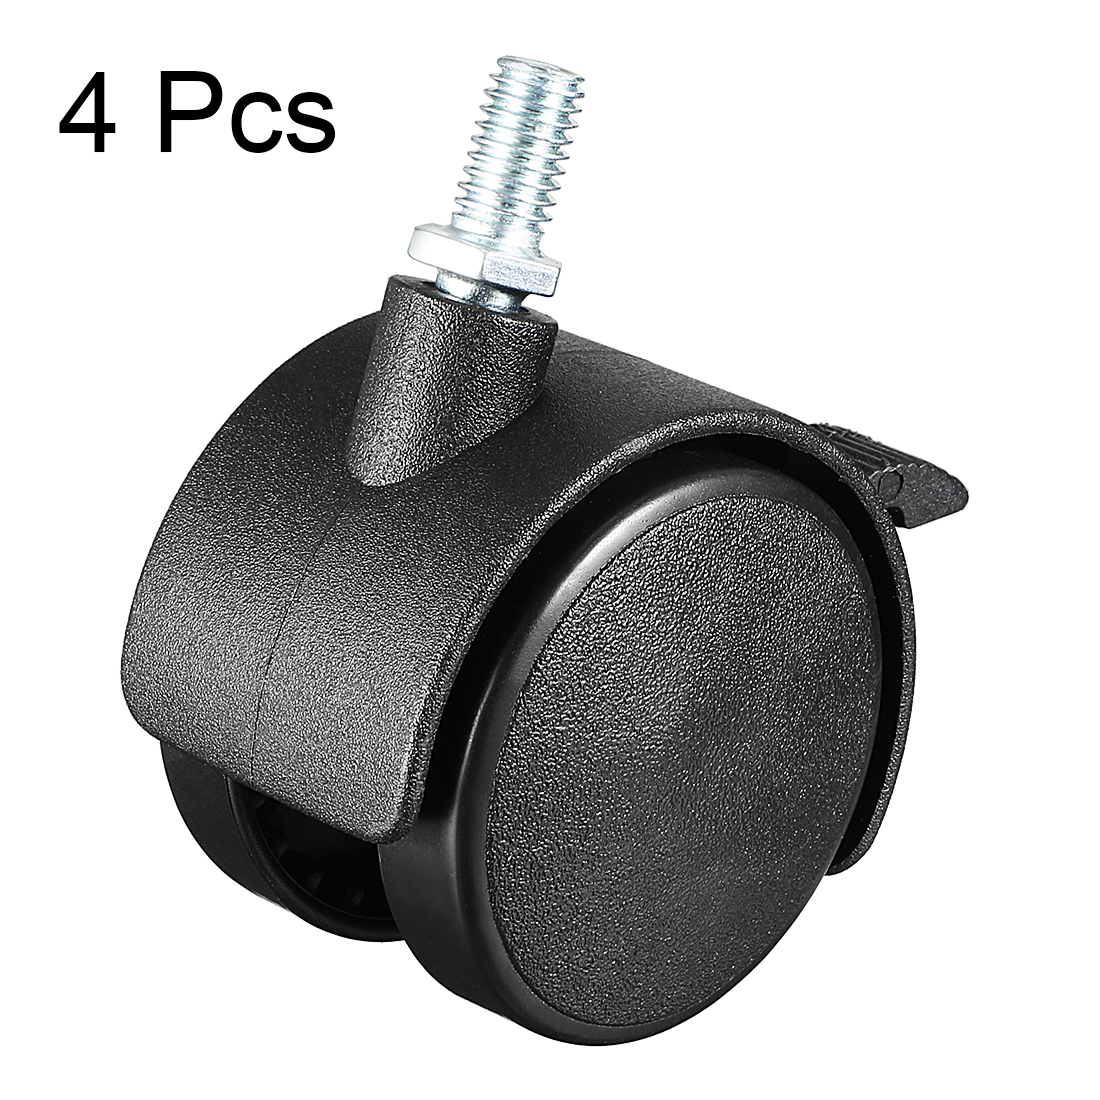 MroMax 2 Inch Swivel Caster Wheels PP 360 Degree Threaded Stem Caster Wheel with Brake M8 x 15mm Pack of 4 198lb Total Load Capacity